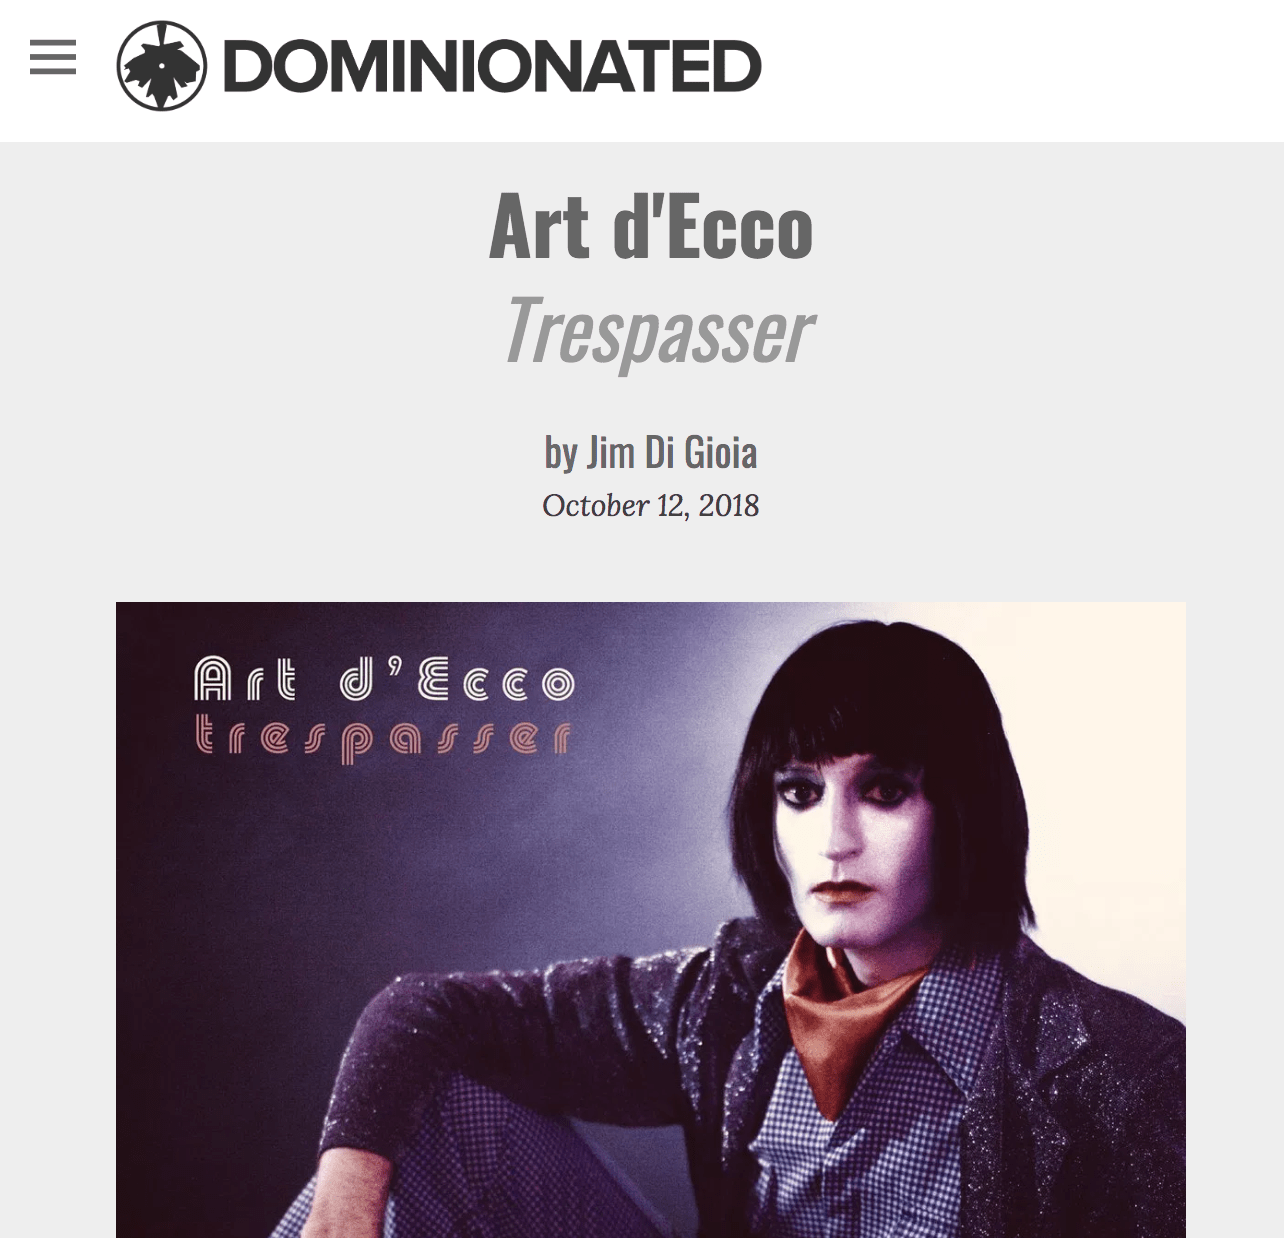 Dominionated Review Art d'Ecco